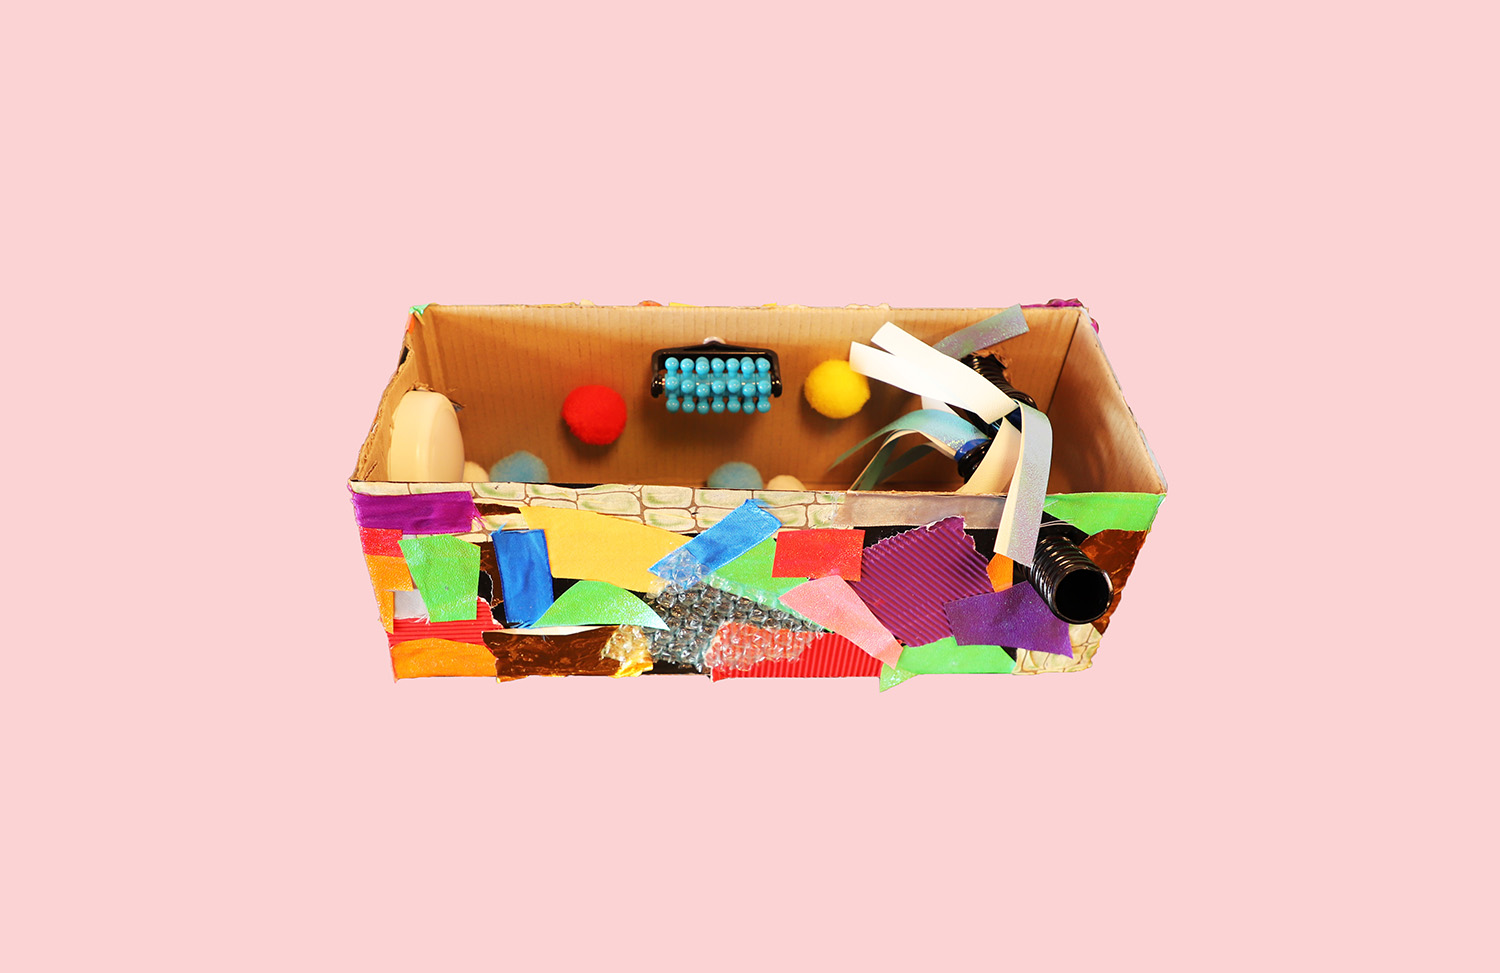 A cardboard box that has been opened to create a room. The room contains several sensory items including a green rubber mat, a blue knobbly wall feature, and colourful pompom balls. Lots of colourful paper is stuck on the outside walls.